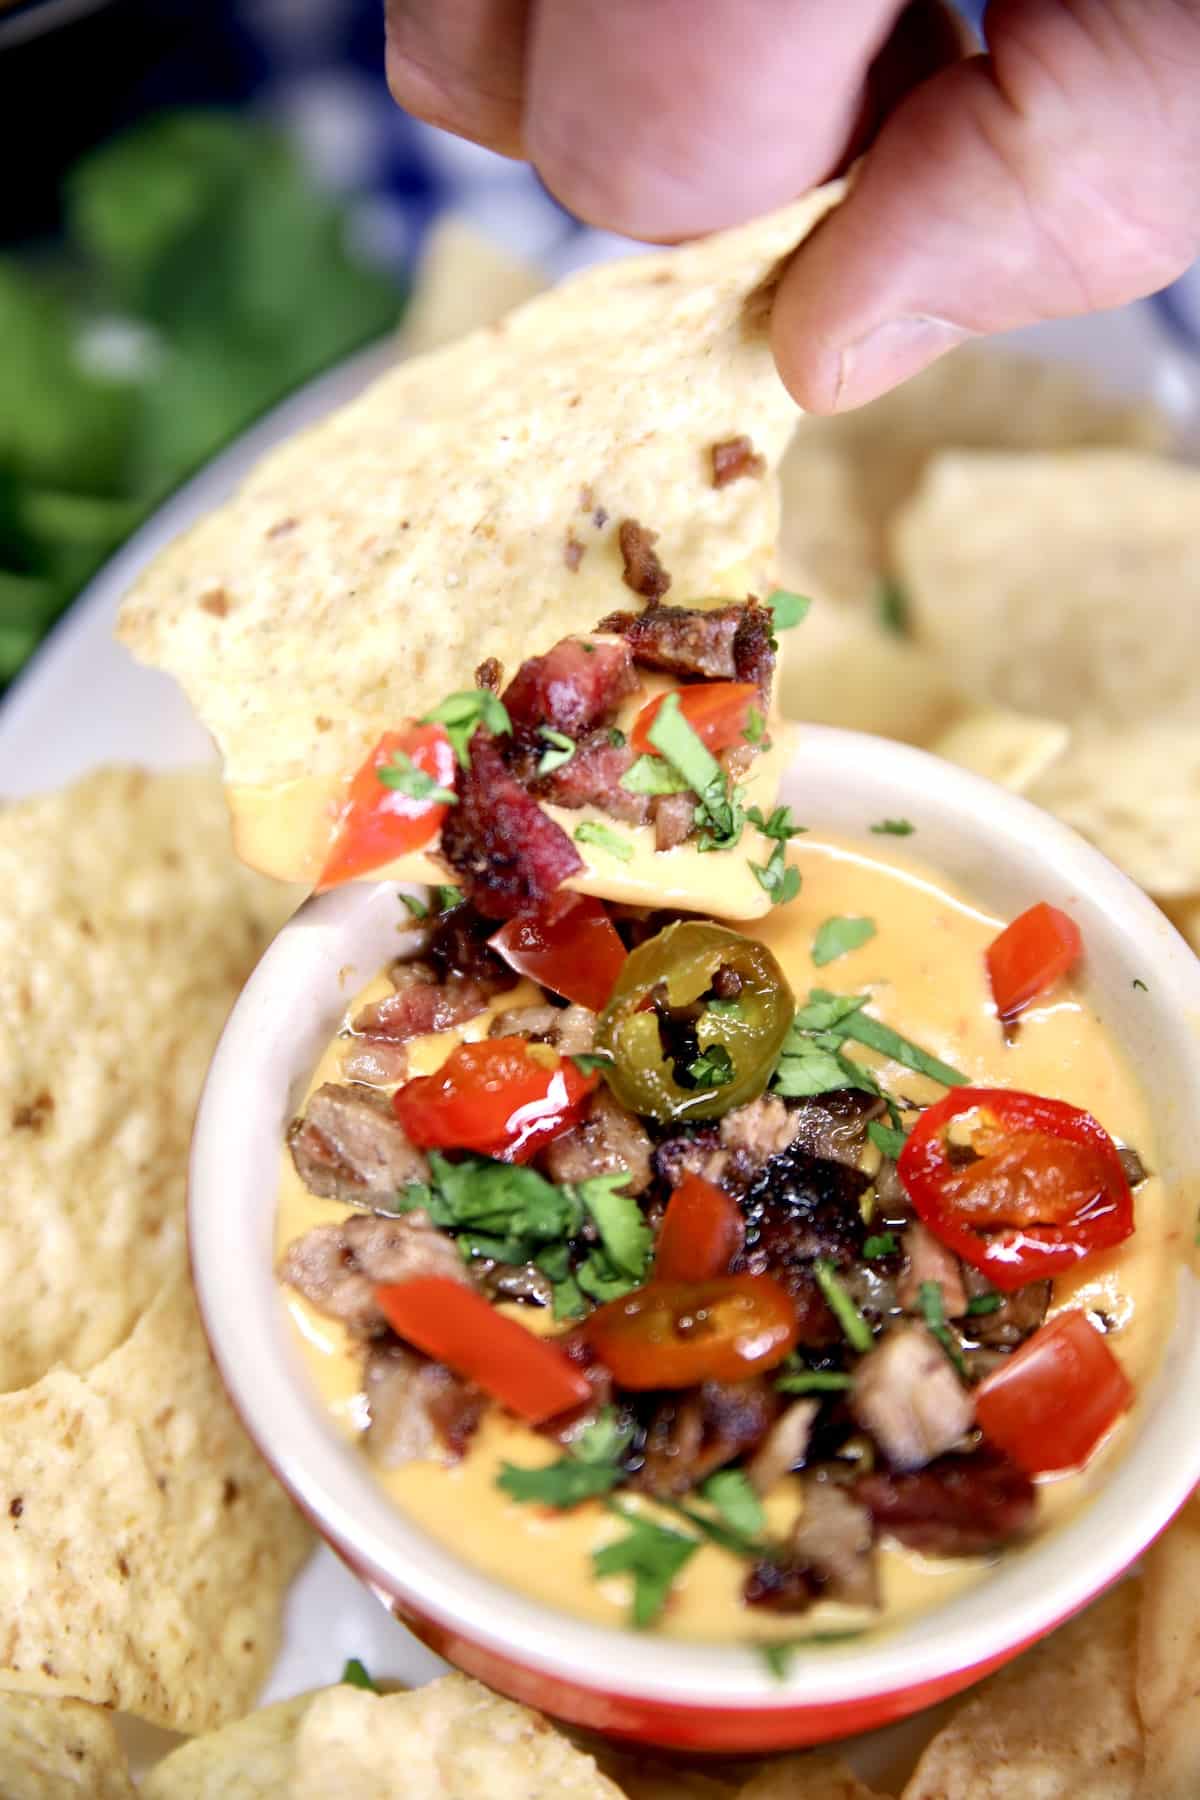 Hand holding tortilla chip with brisket queso, jalapenos.